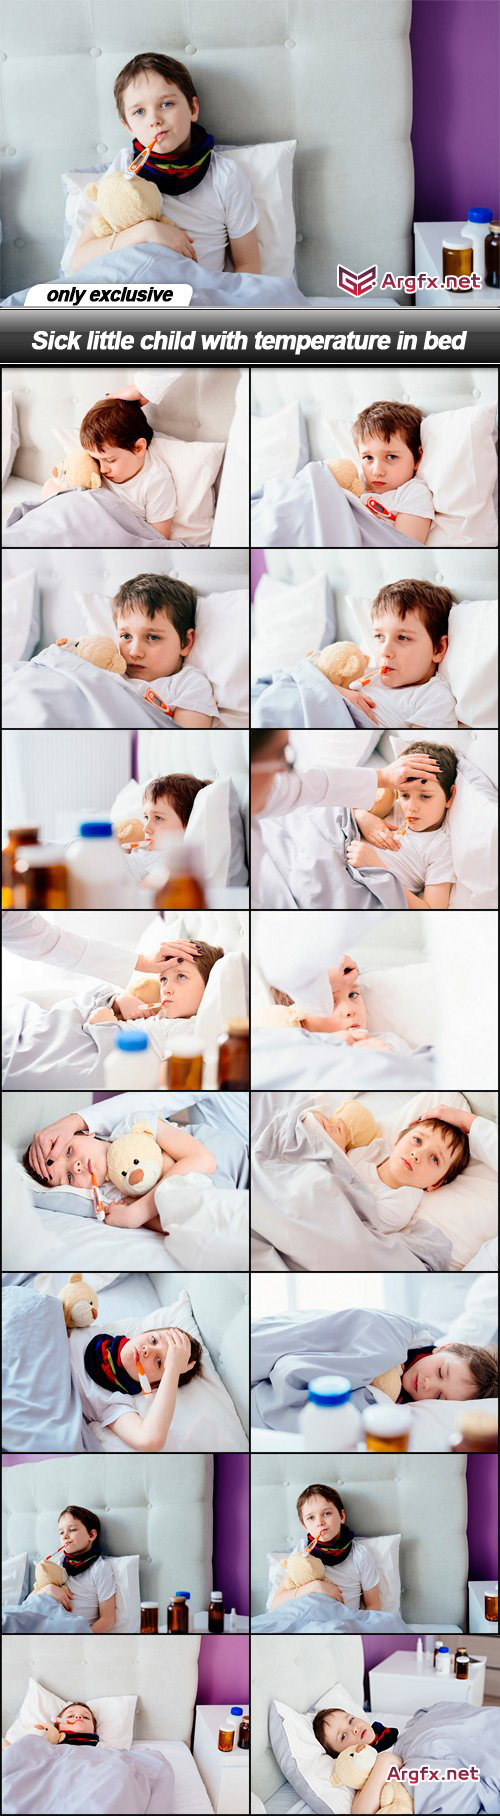  Sick little child with temperature in bed - 16 UHQ JPEG